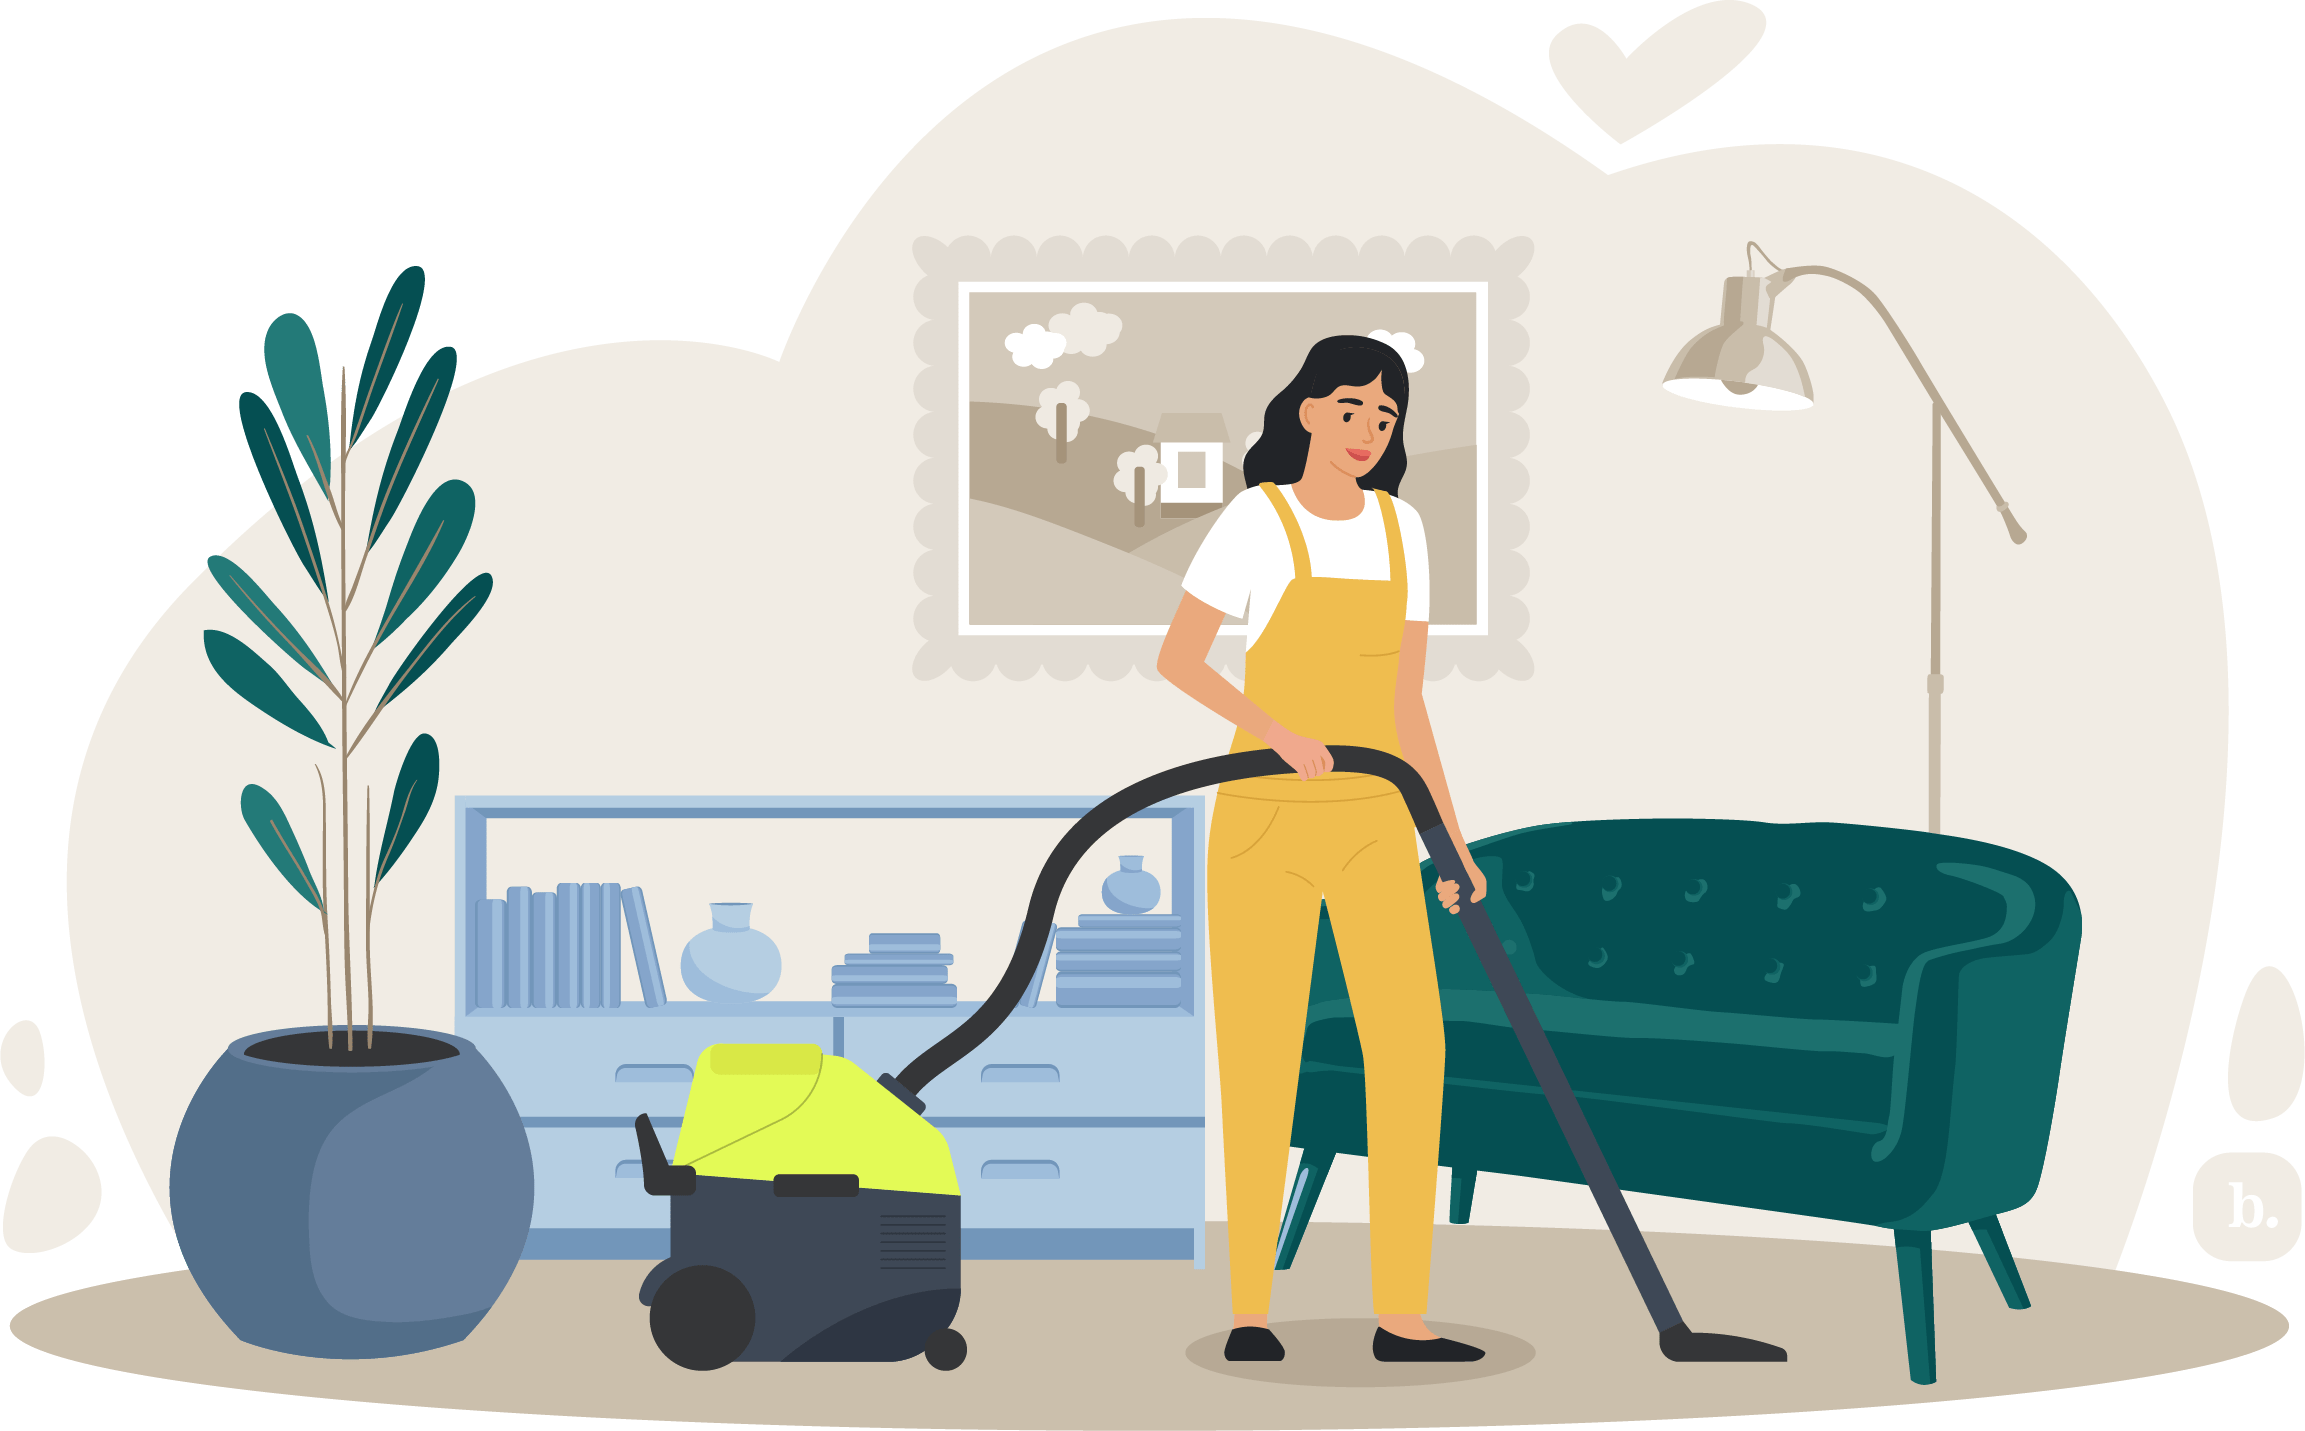 graphic of a perosn vacuuming a living room